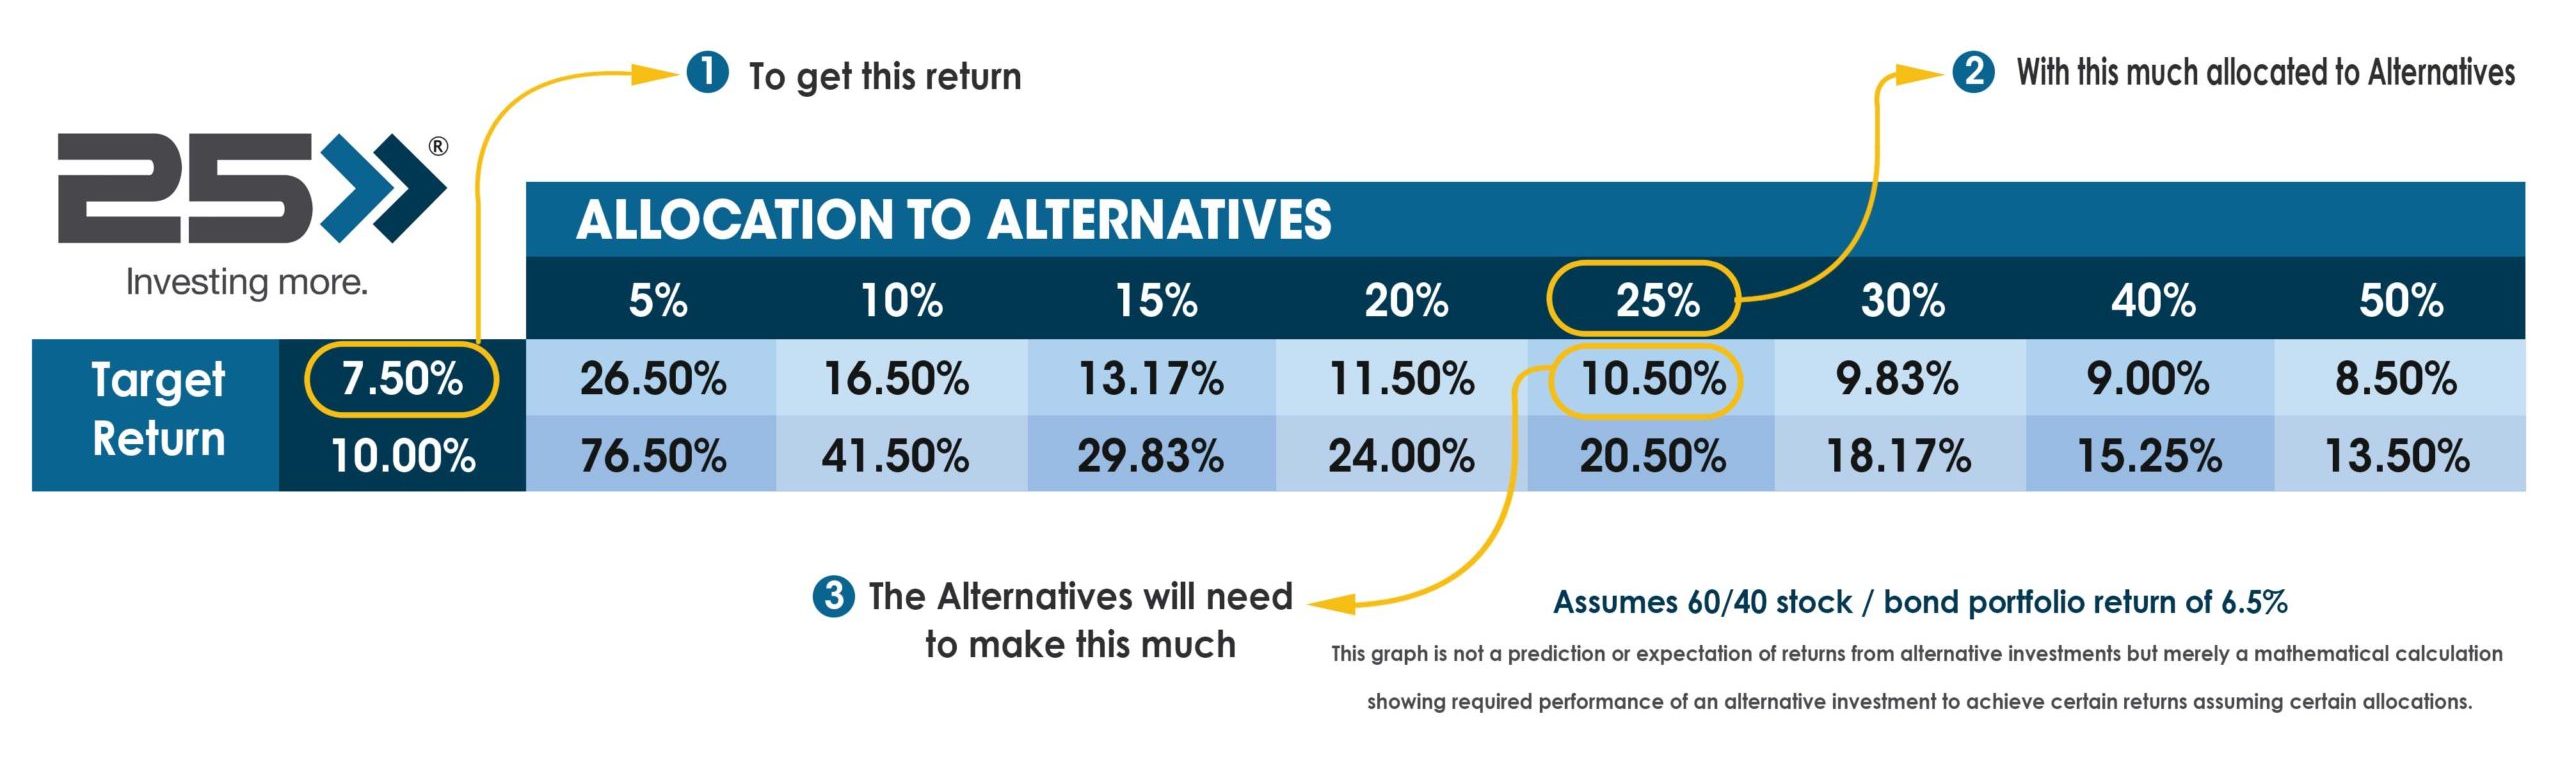 Allocation to Alternatives investment funds for target portfolio return - financial planning for physicians